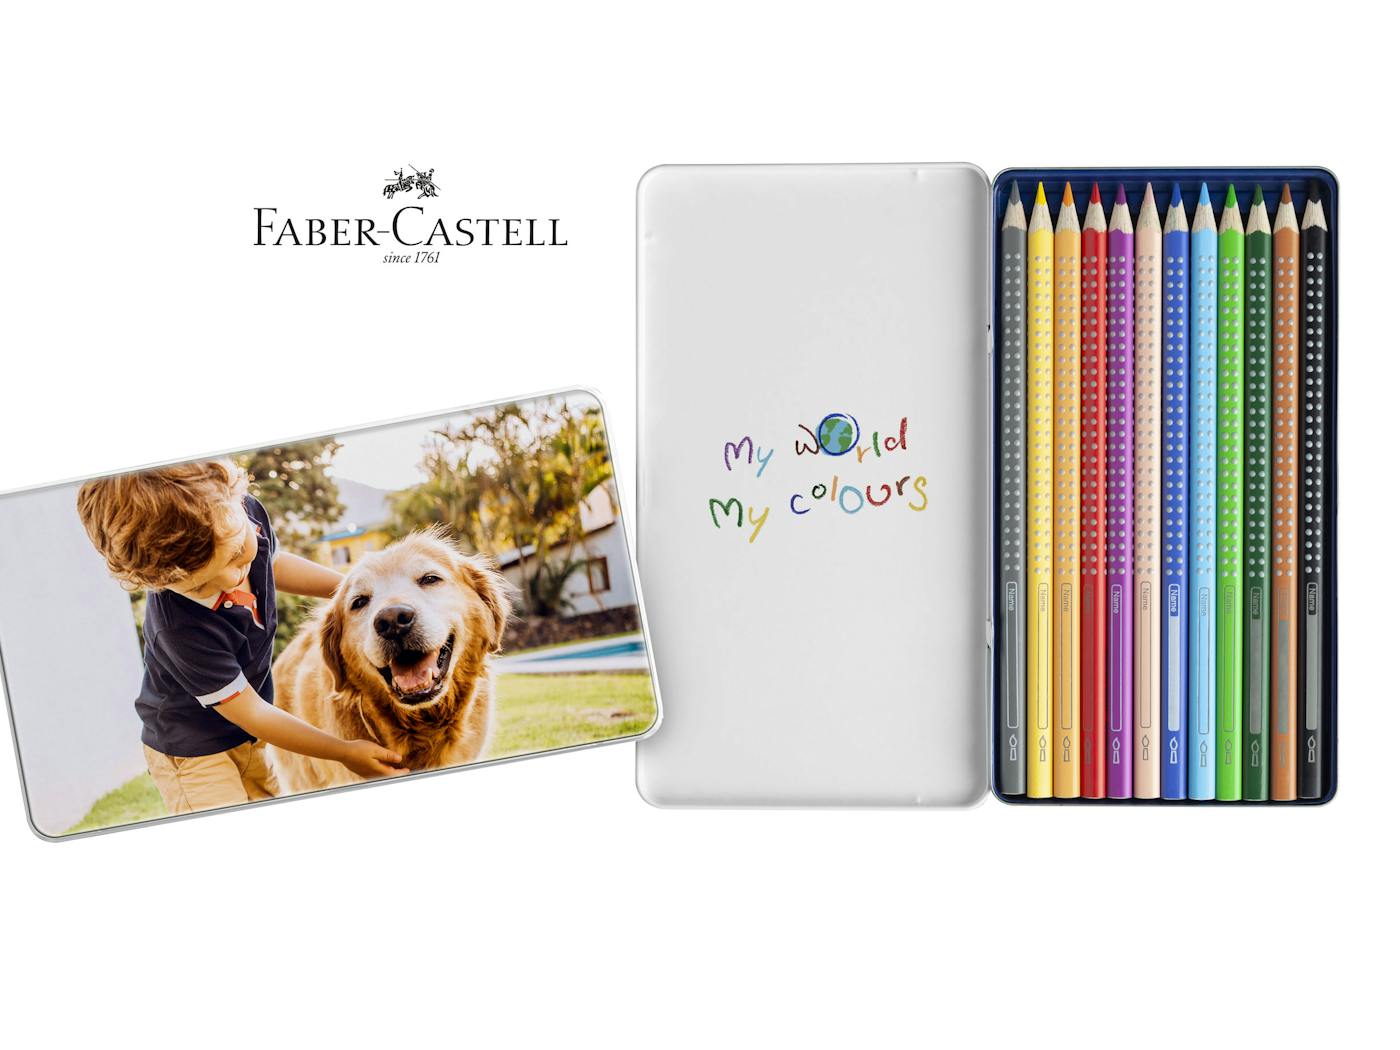 Here is how you design a custom pencil box from Faber-Castell